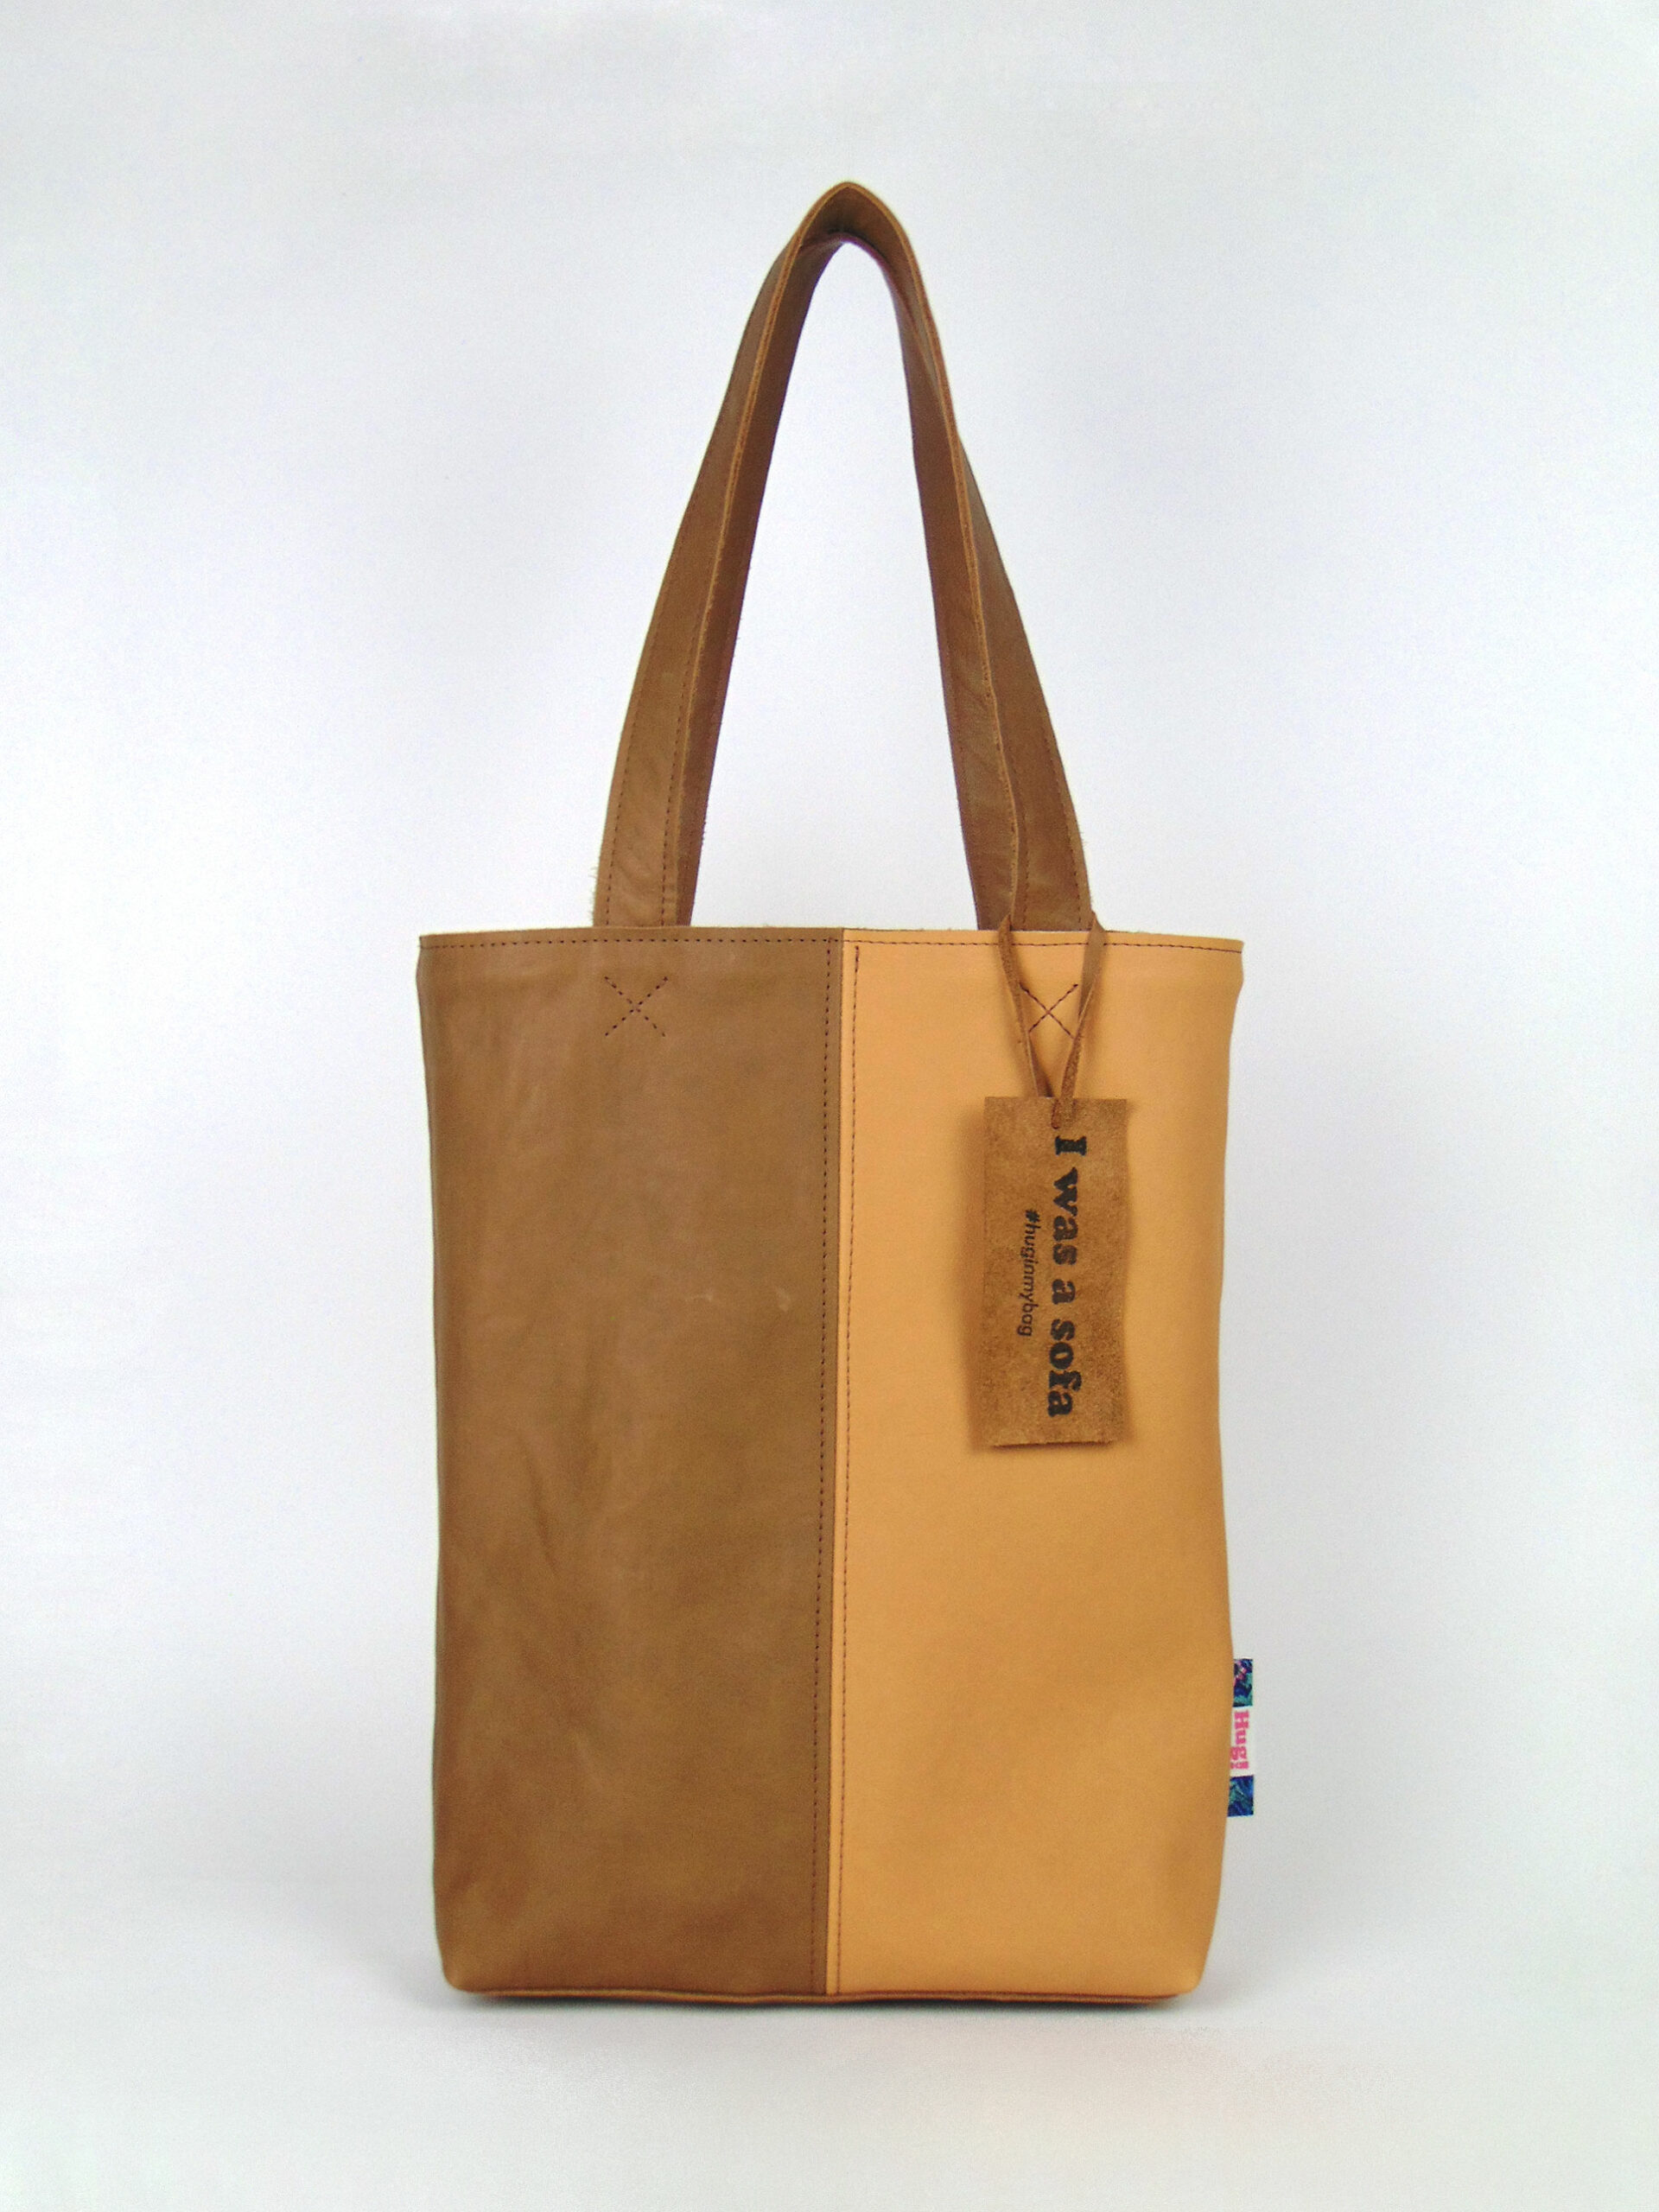 Product image of the shopper named Soft Vanilla. This shopper is made from recycled leather in a colour combination of beige and nude.